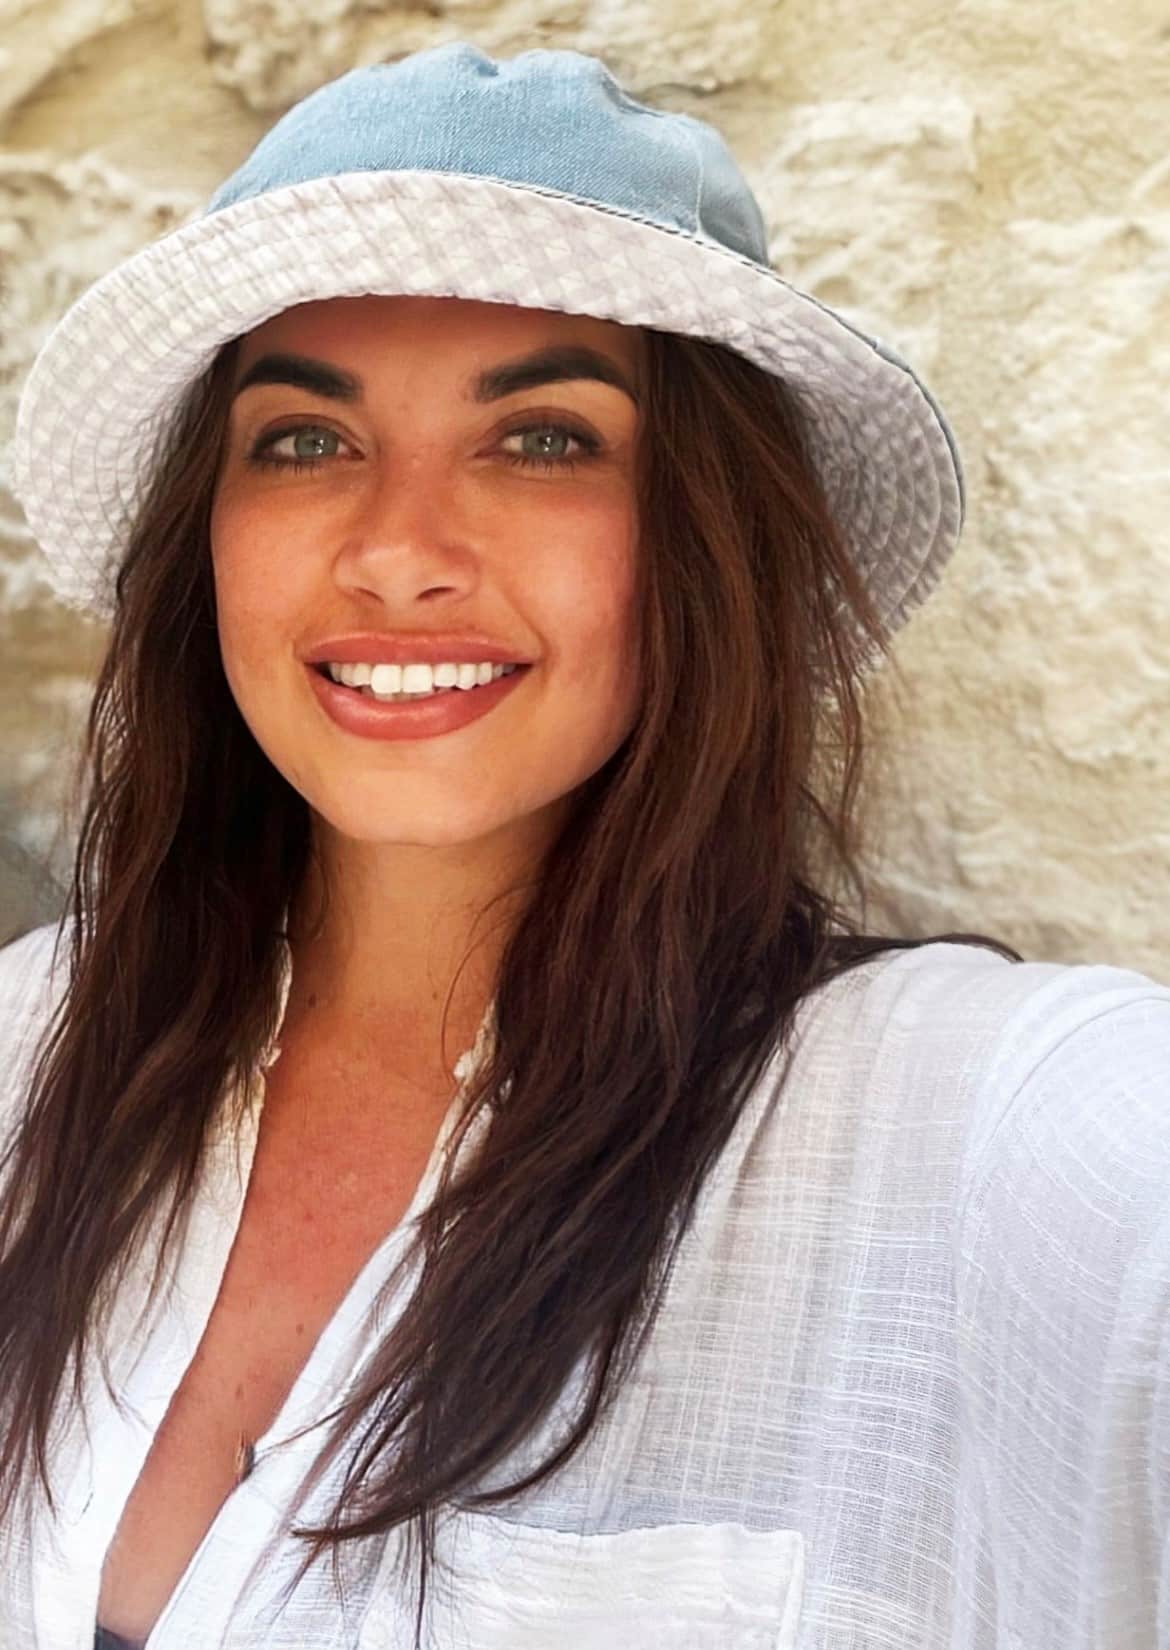 Kiera wears a white top and white and blue hat and smiles at the camera.